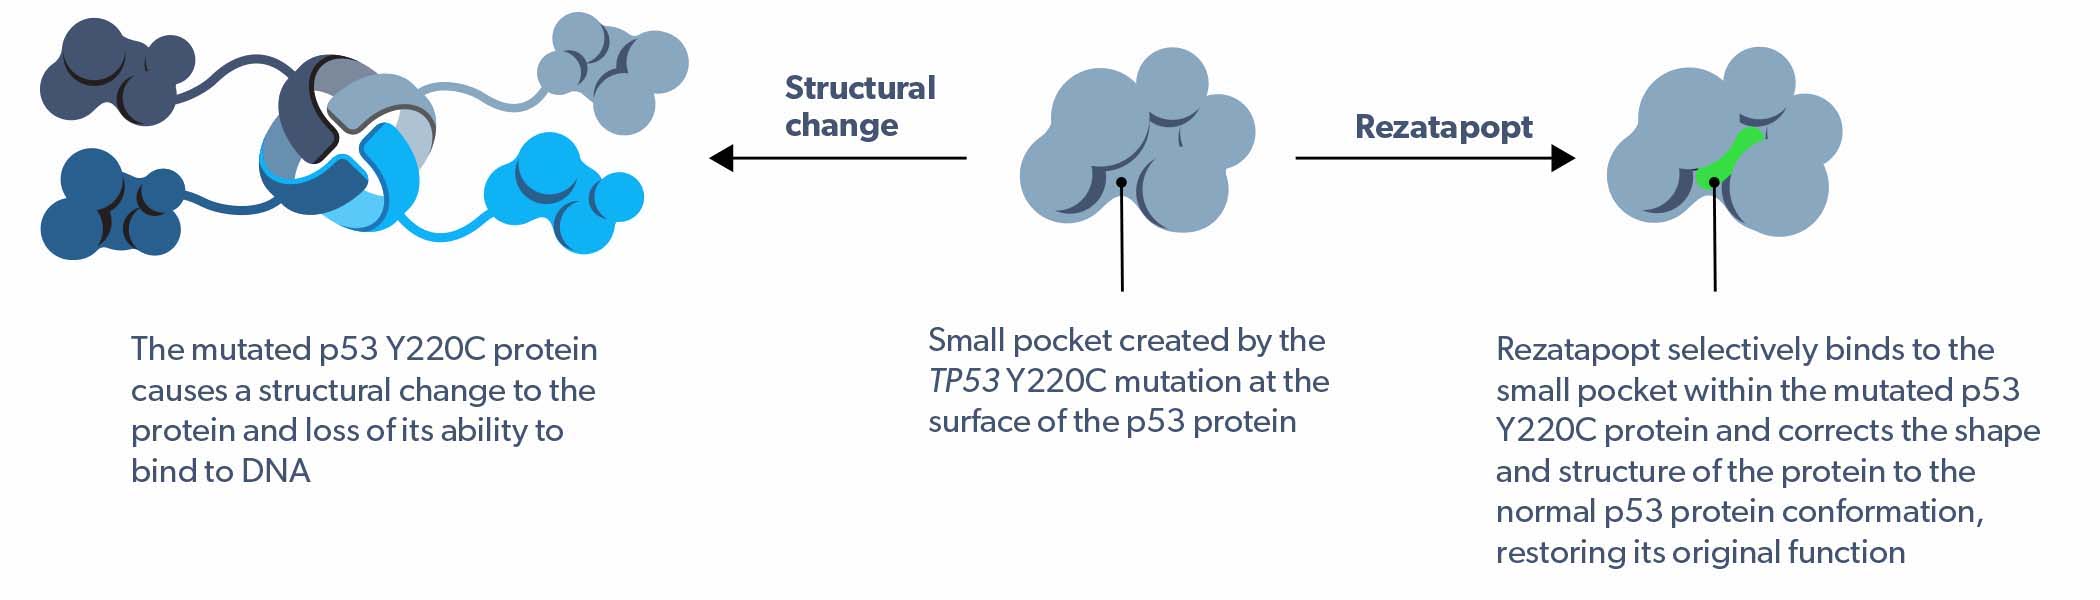 PC14586 mechanism of action